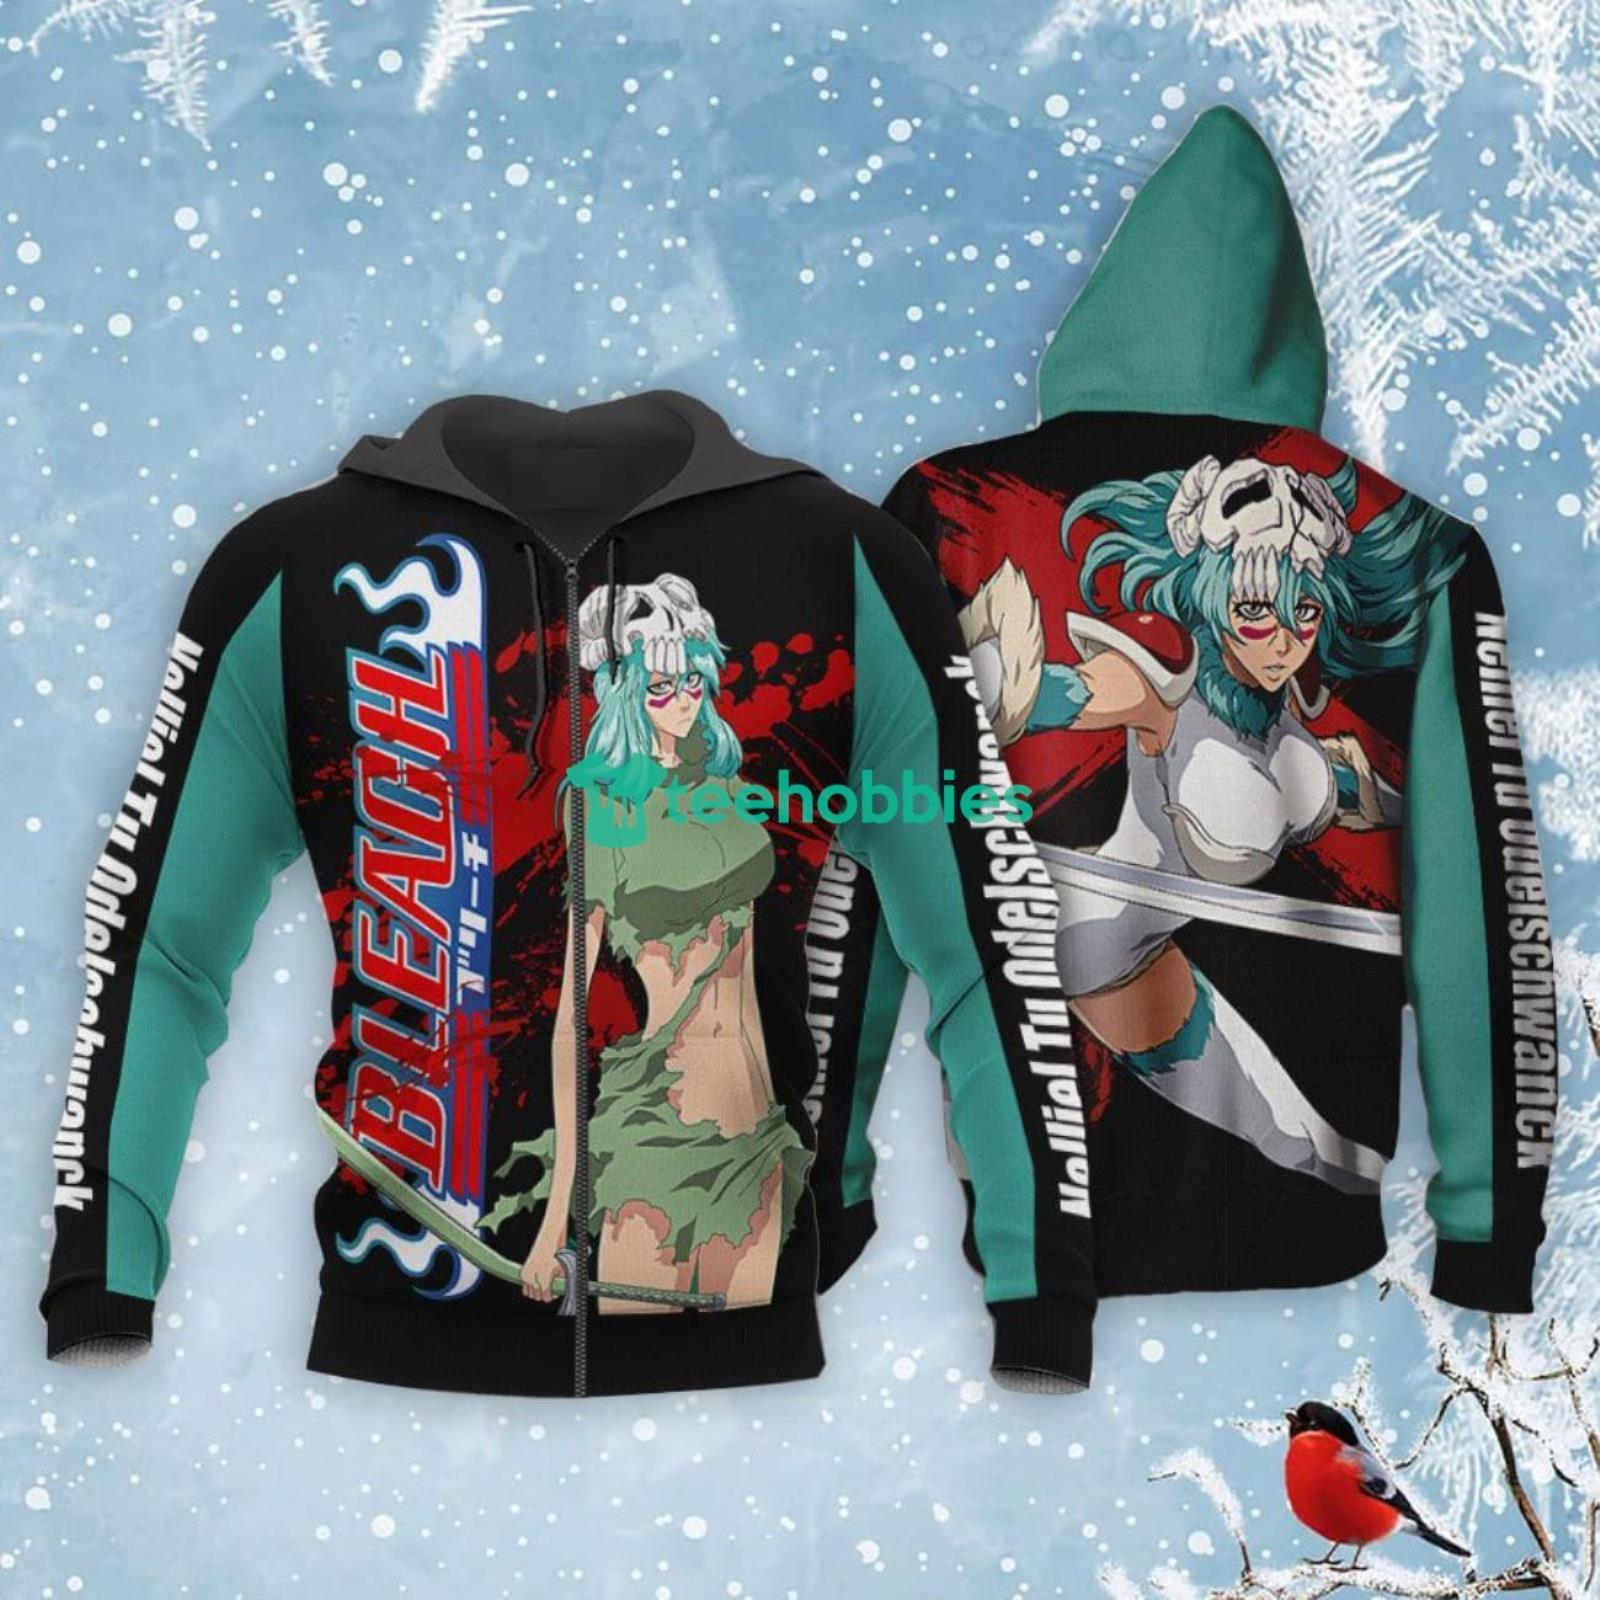 Nel Tu Lover All Over Printed 3D Shirt Bleach Anime Fans Product Photo 1 Product photo 1